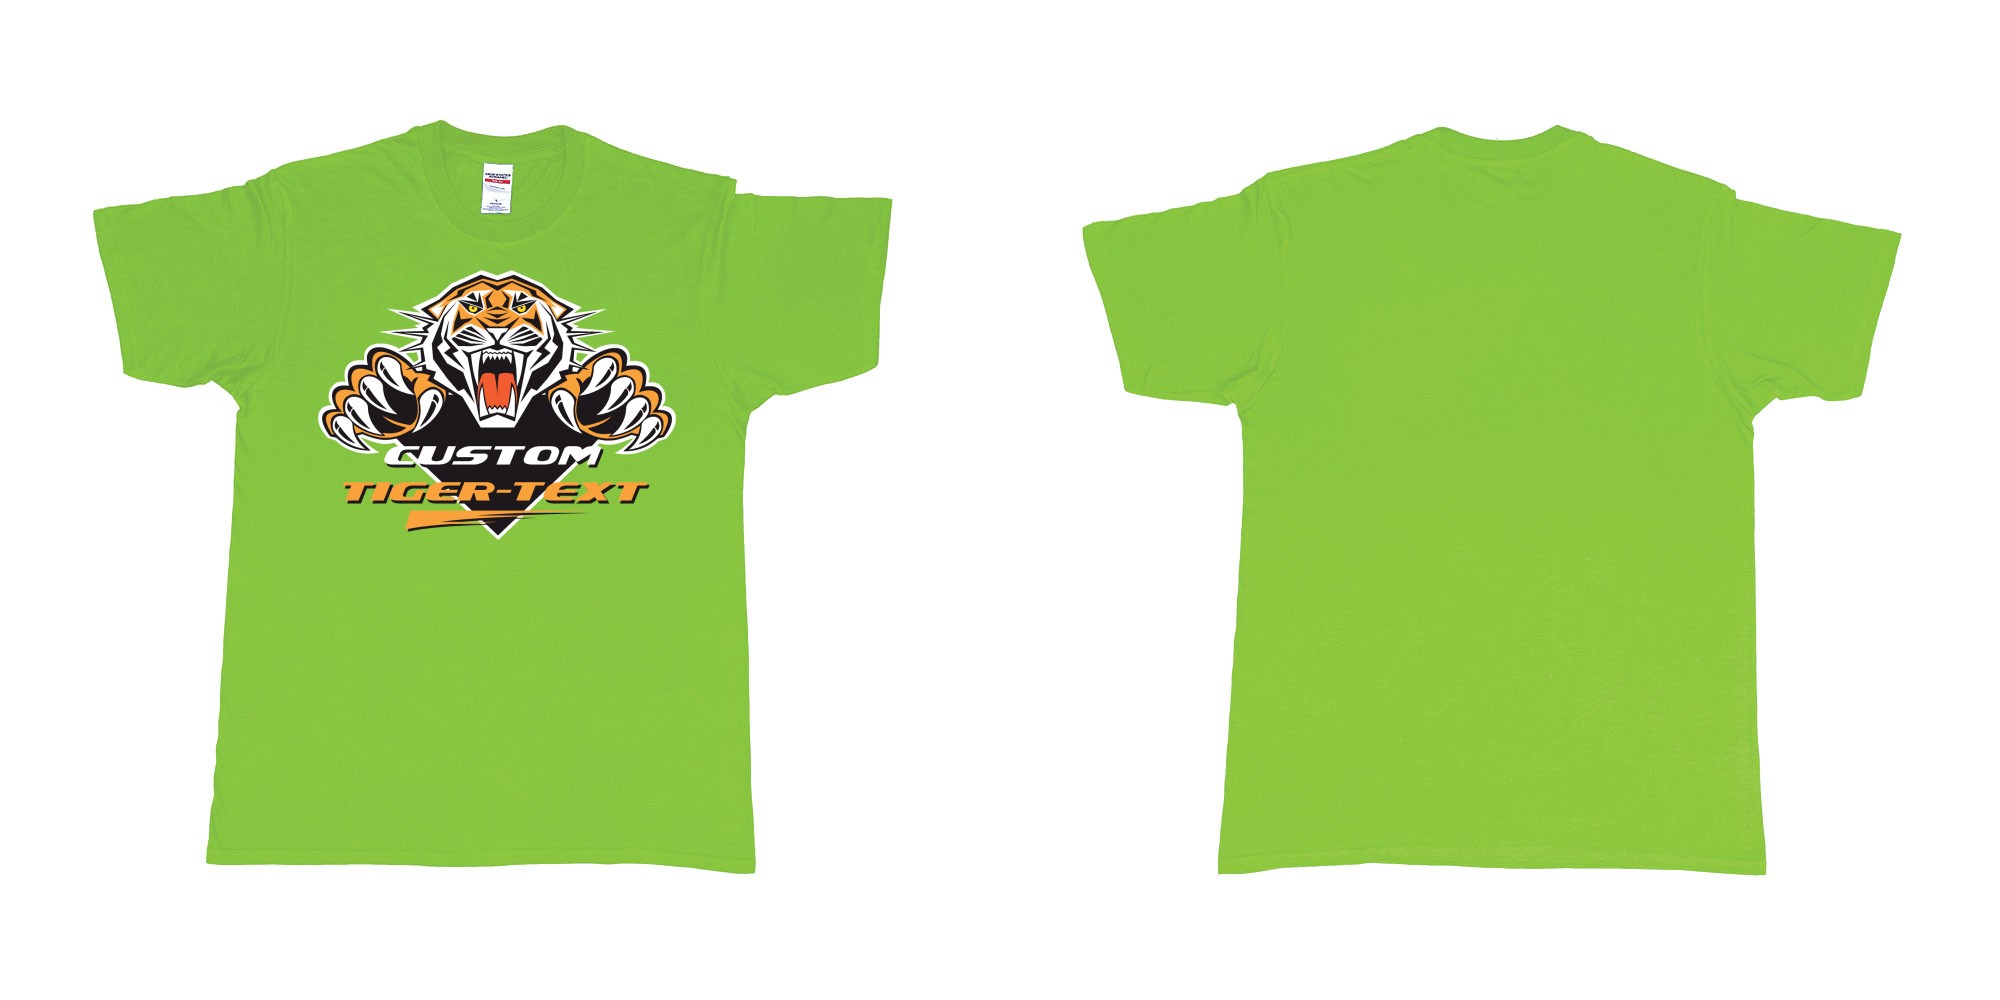 Custom tshirt design the wests tigers sydney national rugby league custom tshirt print in fabric color lime choice your own text made in Bali by The Pirate Way